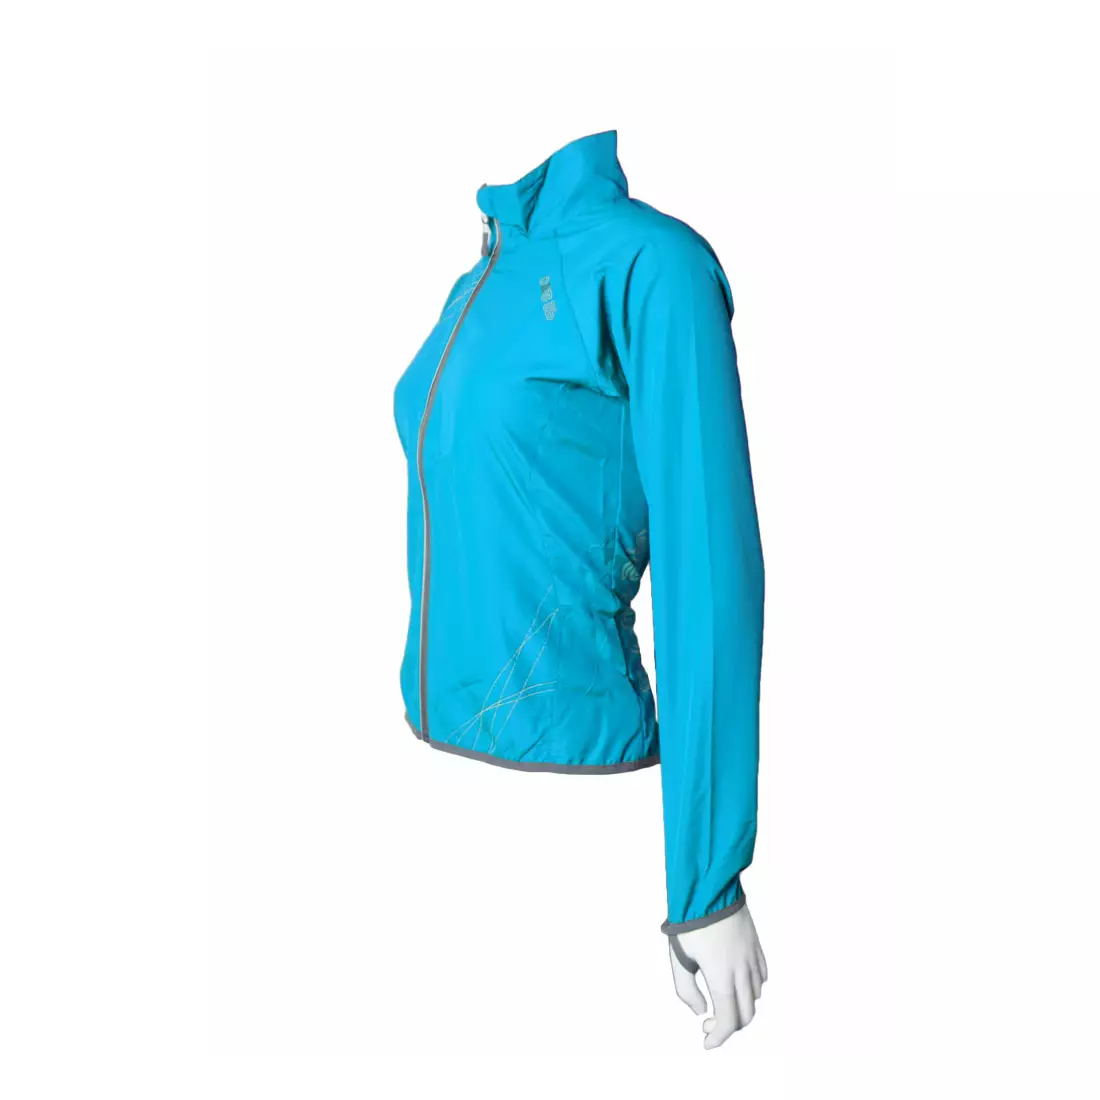 DARE 2B - RUSHED WINDSHELL DWL072 - women's cycling jacket, color: Blue